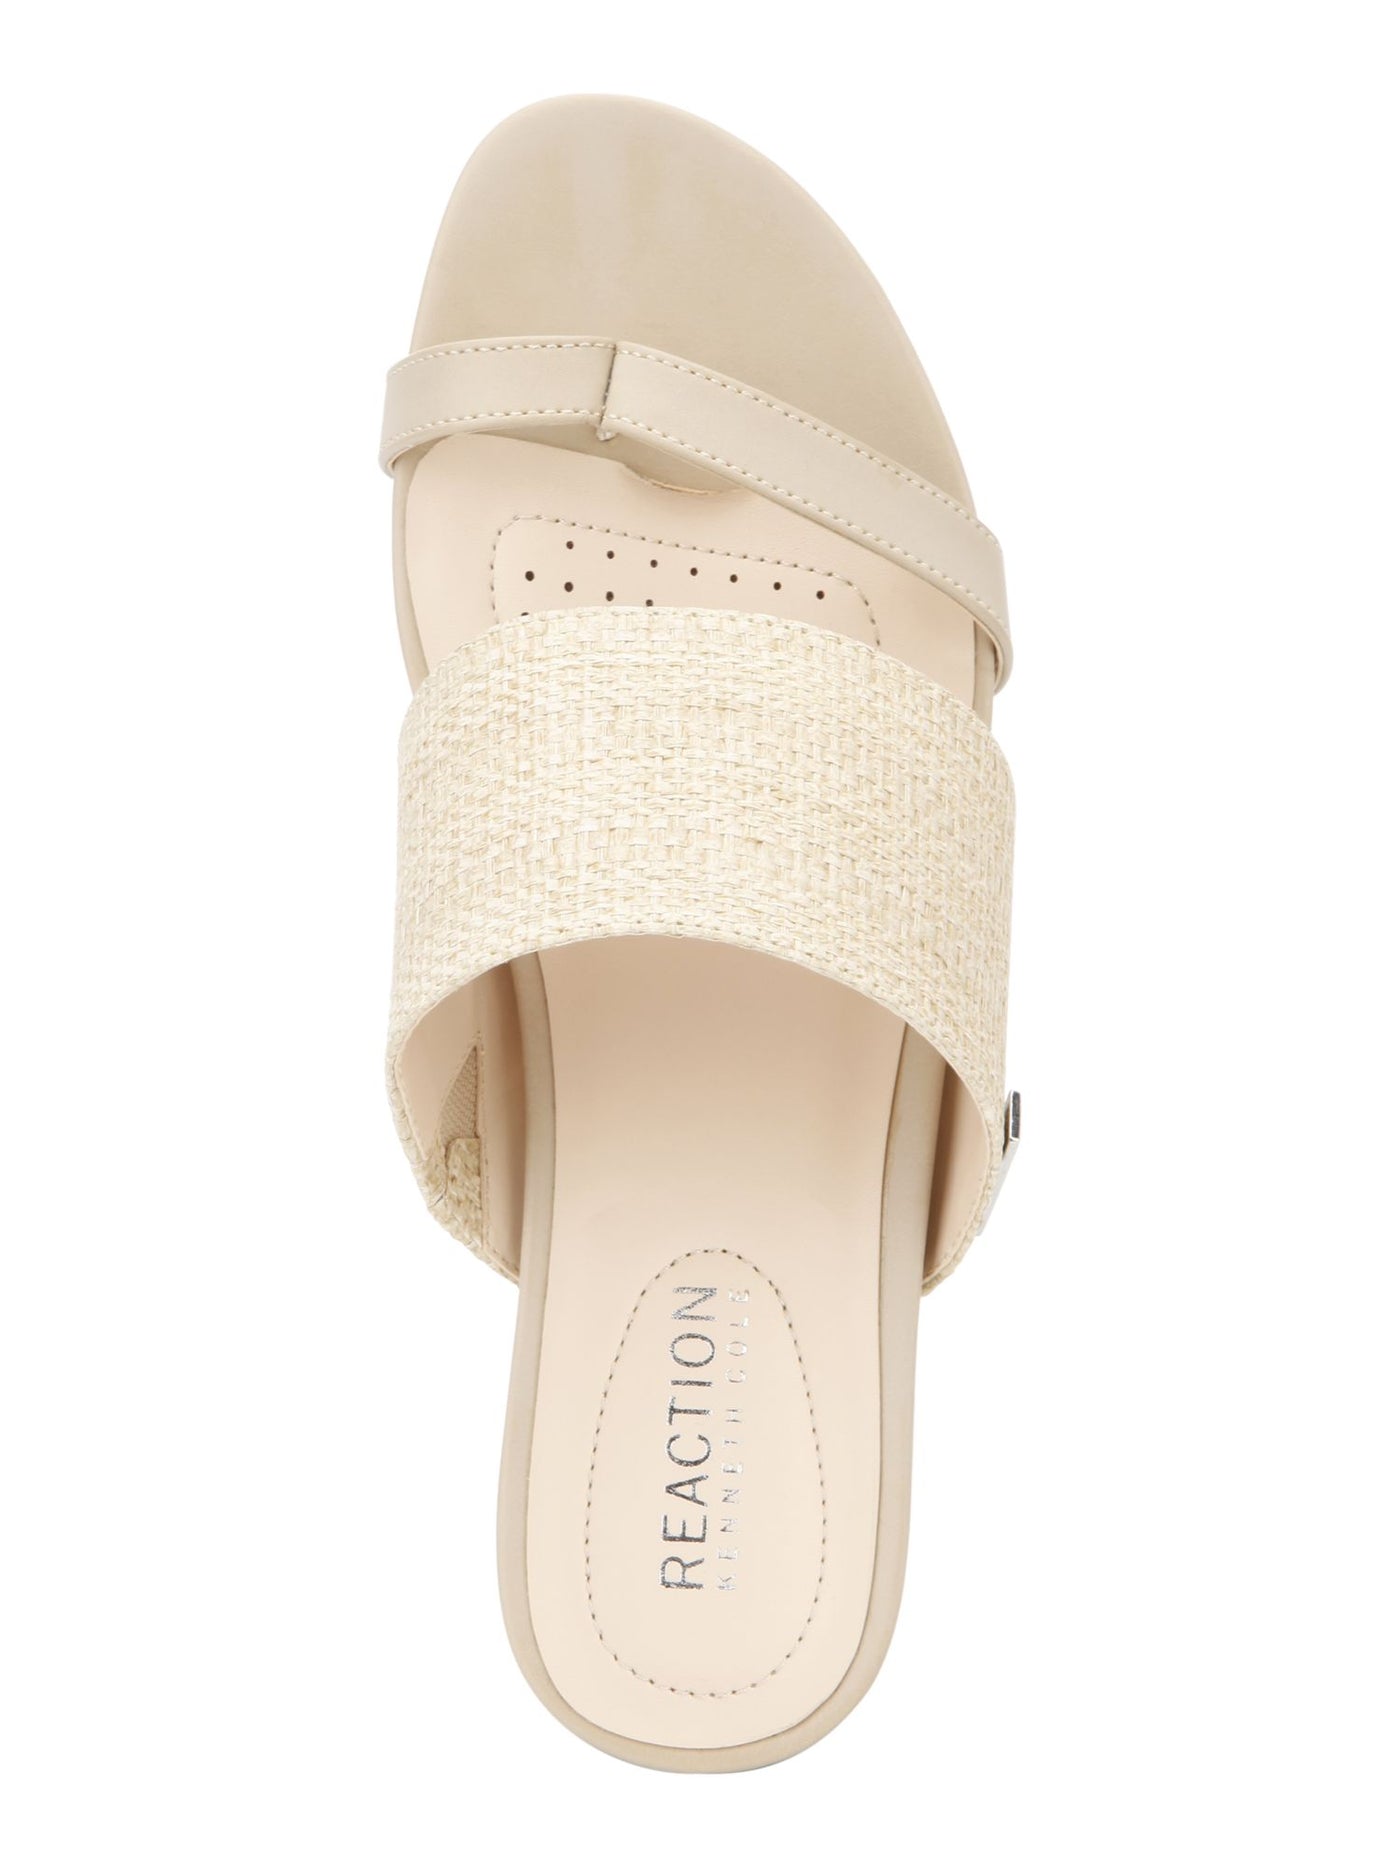 KENNETH COLE Womens Beige Woven Toe Loop Cushioned Logo Late Mule Round Toe Block Heel Slip On Thong Sandals Shoes 7 M